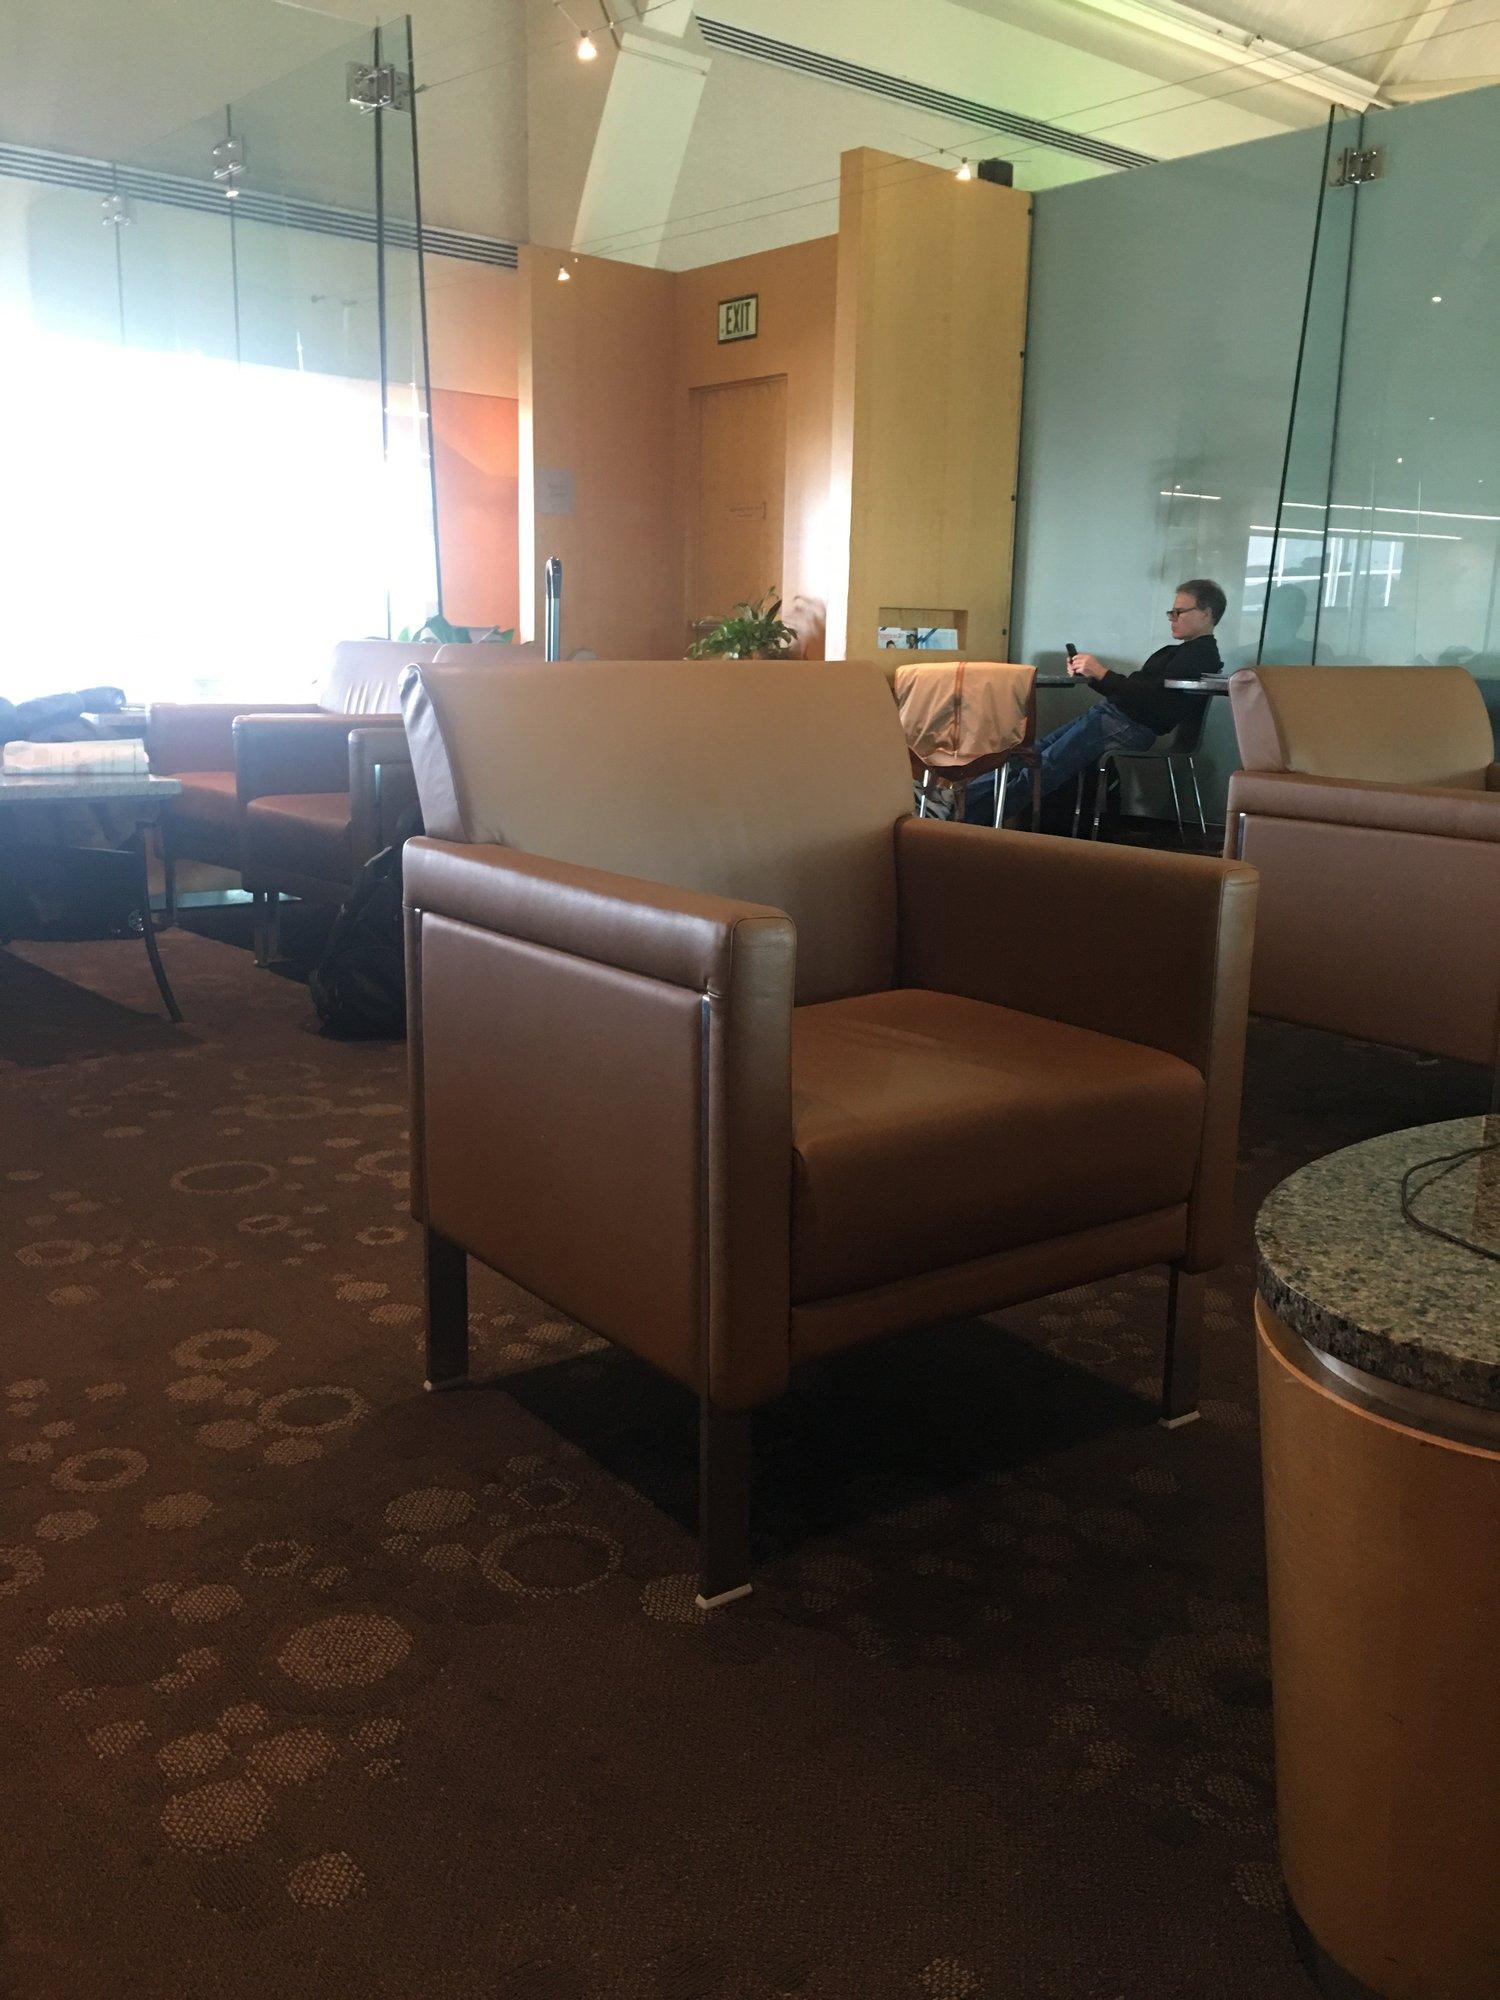 American Airlines Admirals Club image 8 of 12